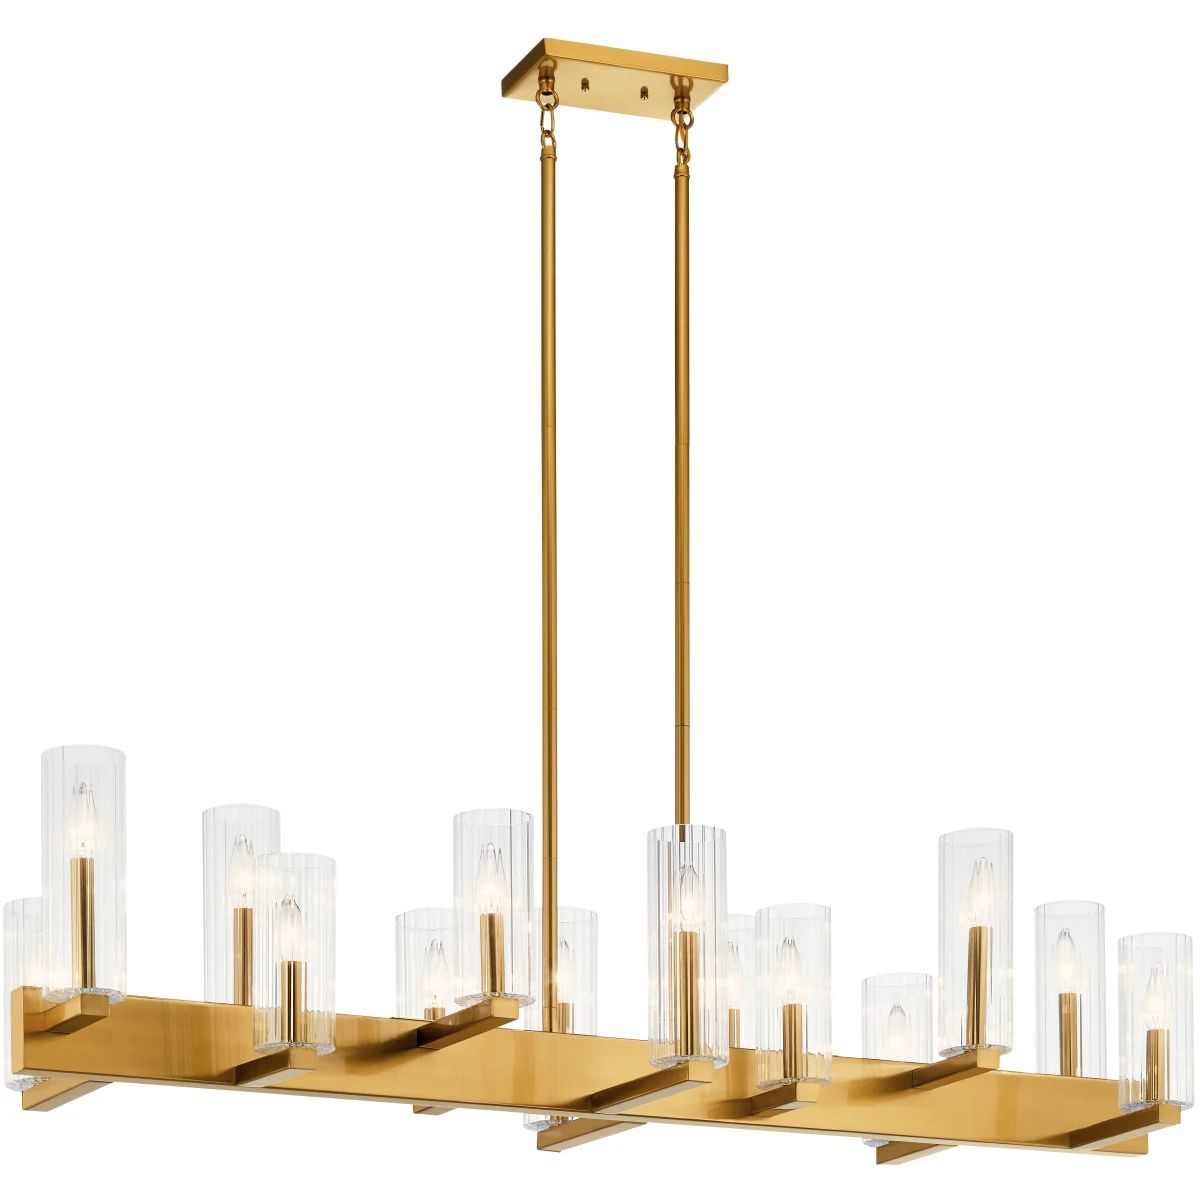 Kichler 44317FXG Fox Gold Cleara 14 Light 53" Wide Taper Candle Chandelier | Build.com, Inc.